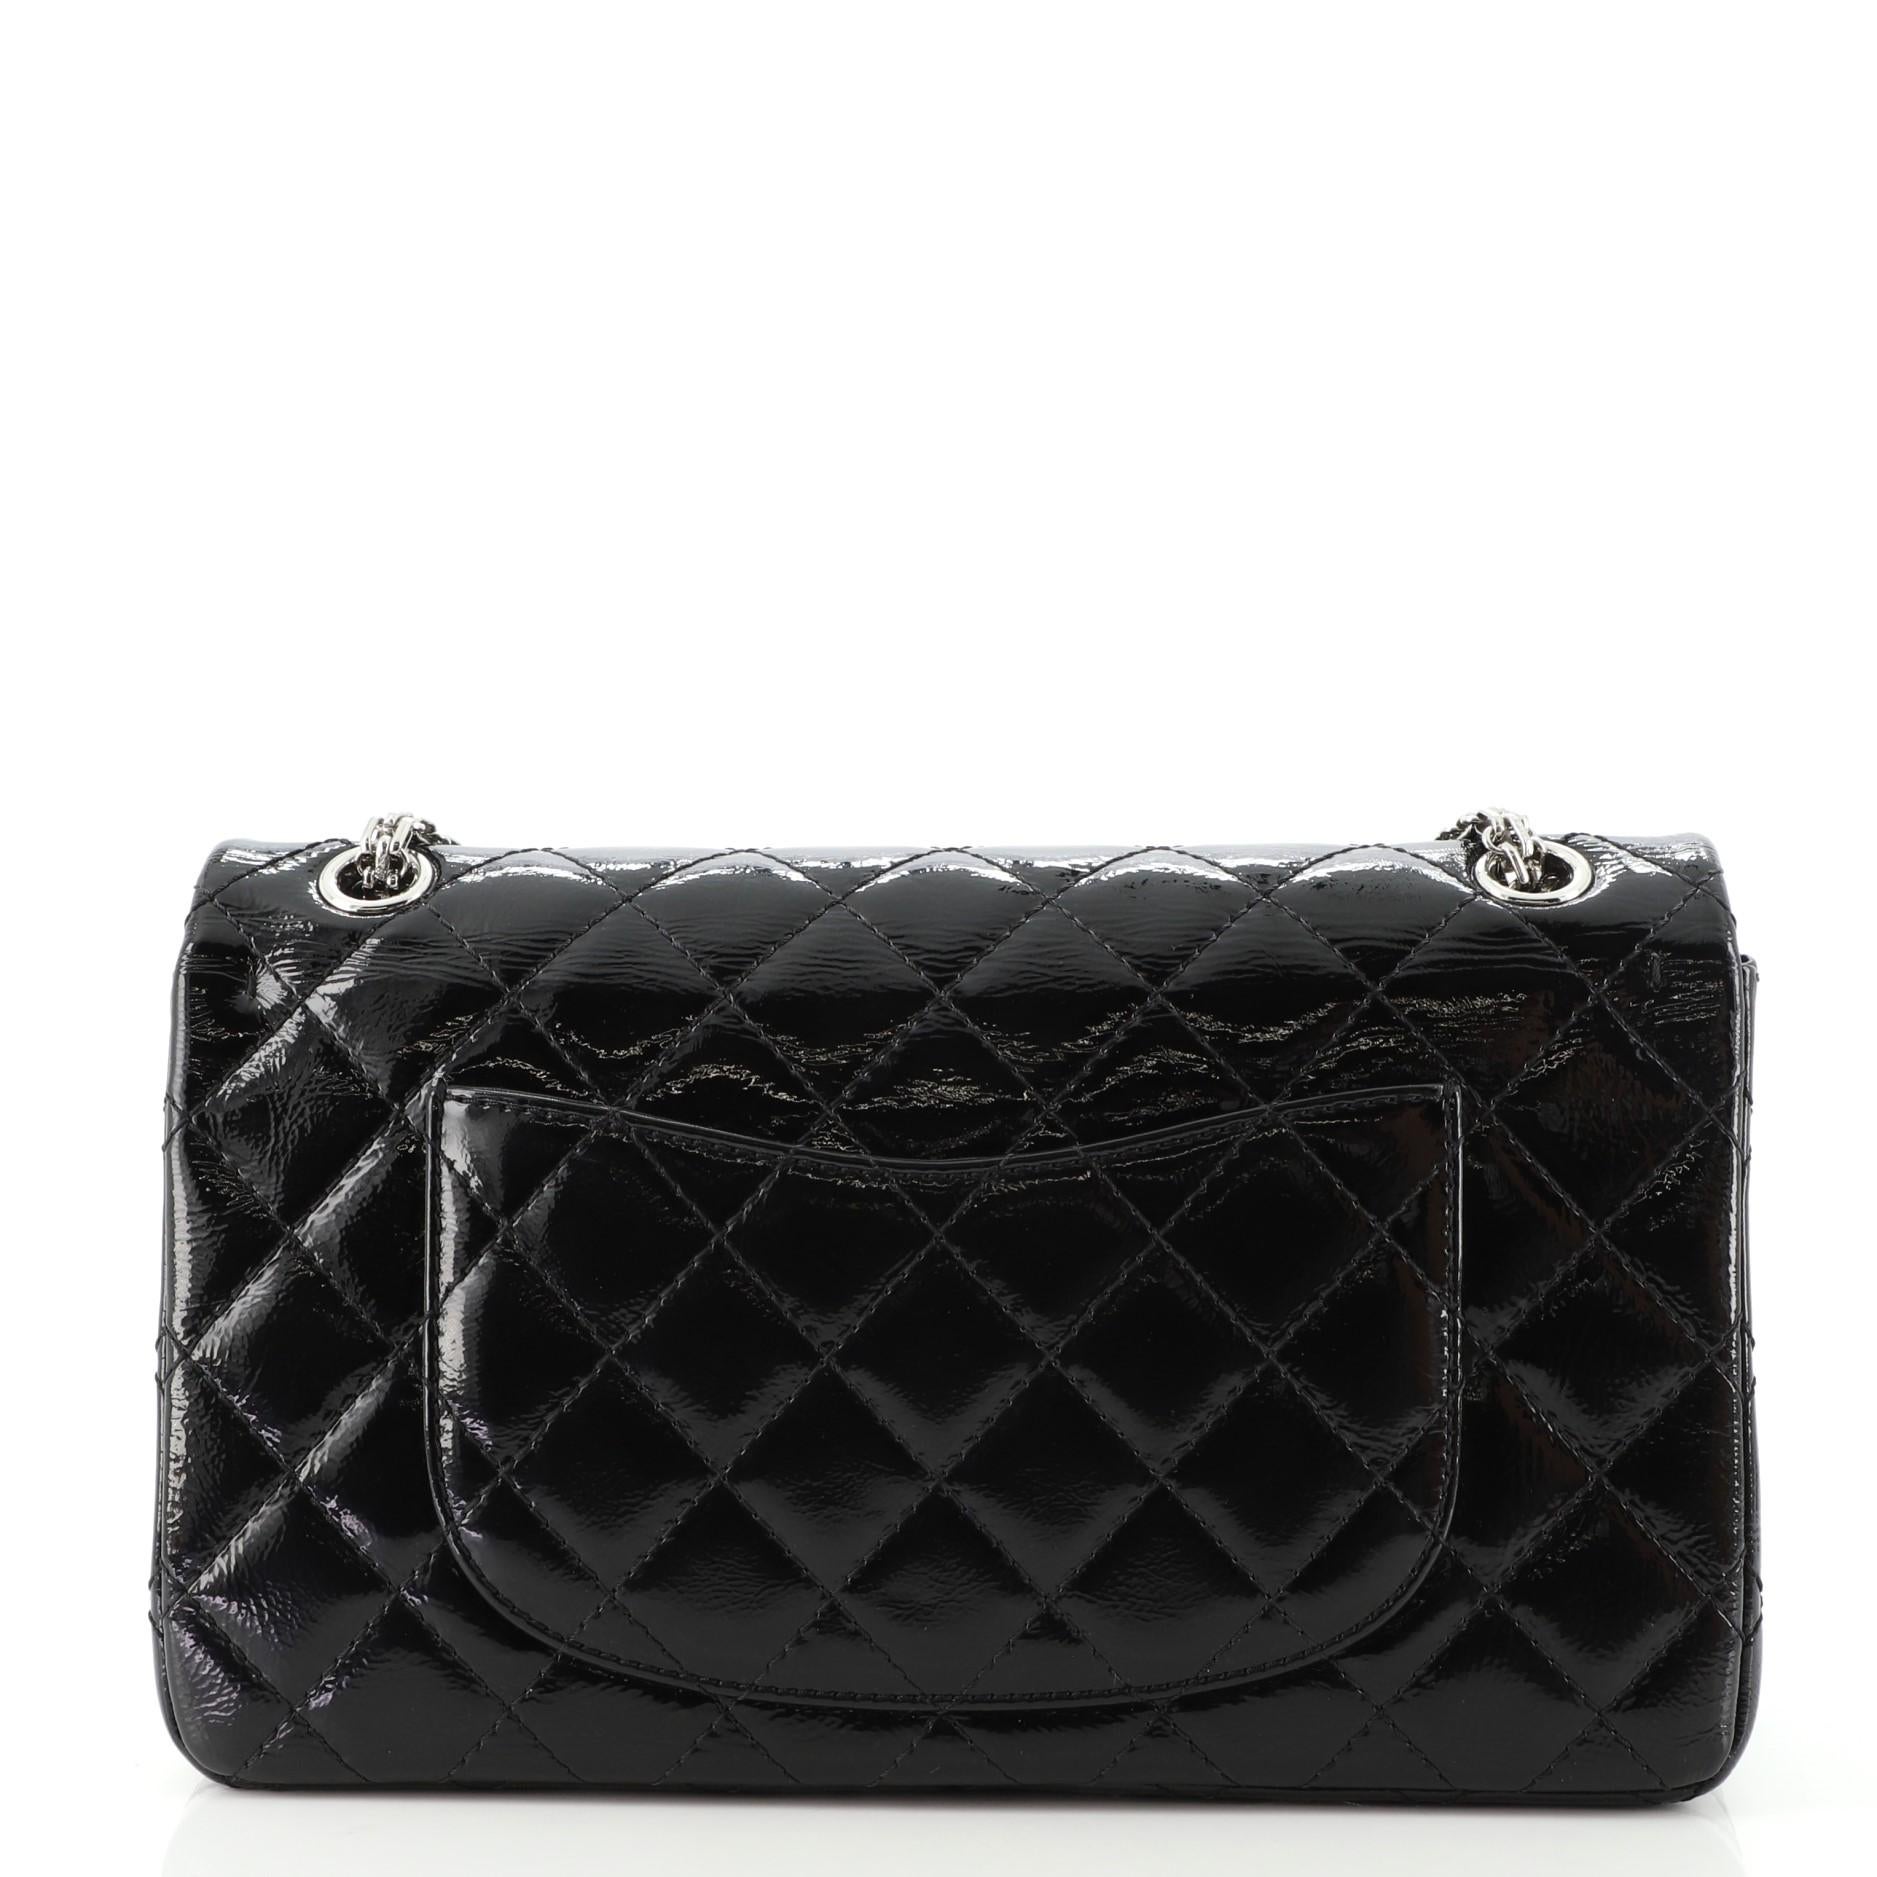 Black Chanel Reissue 2.55 Flap Bag Quilted Patent 226